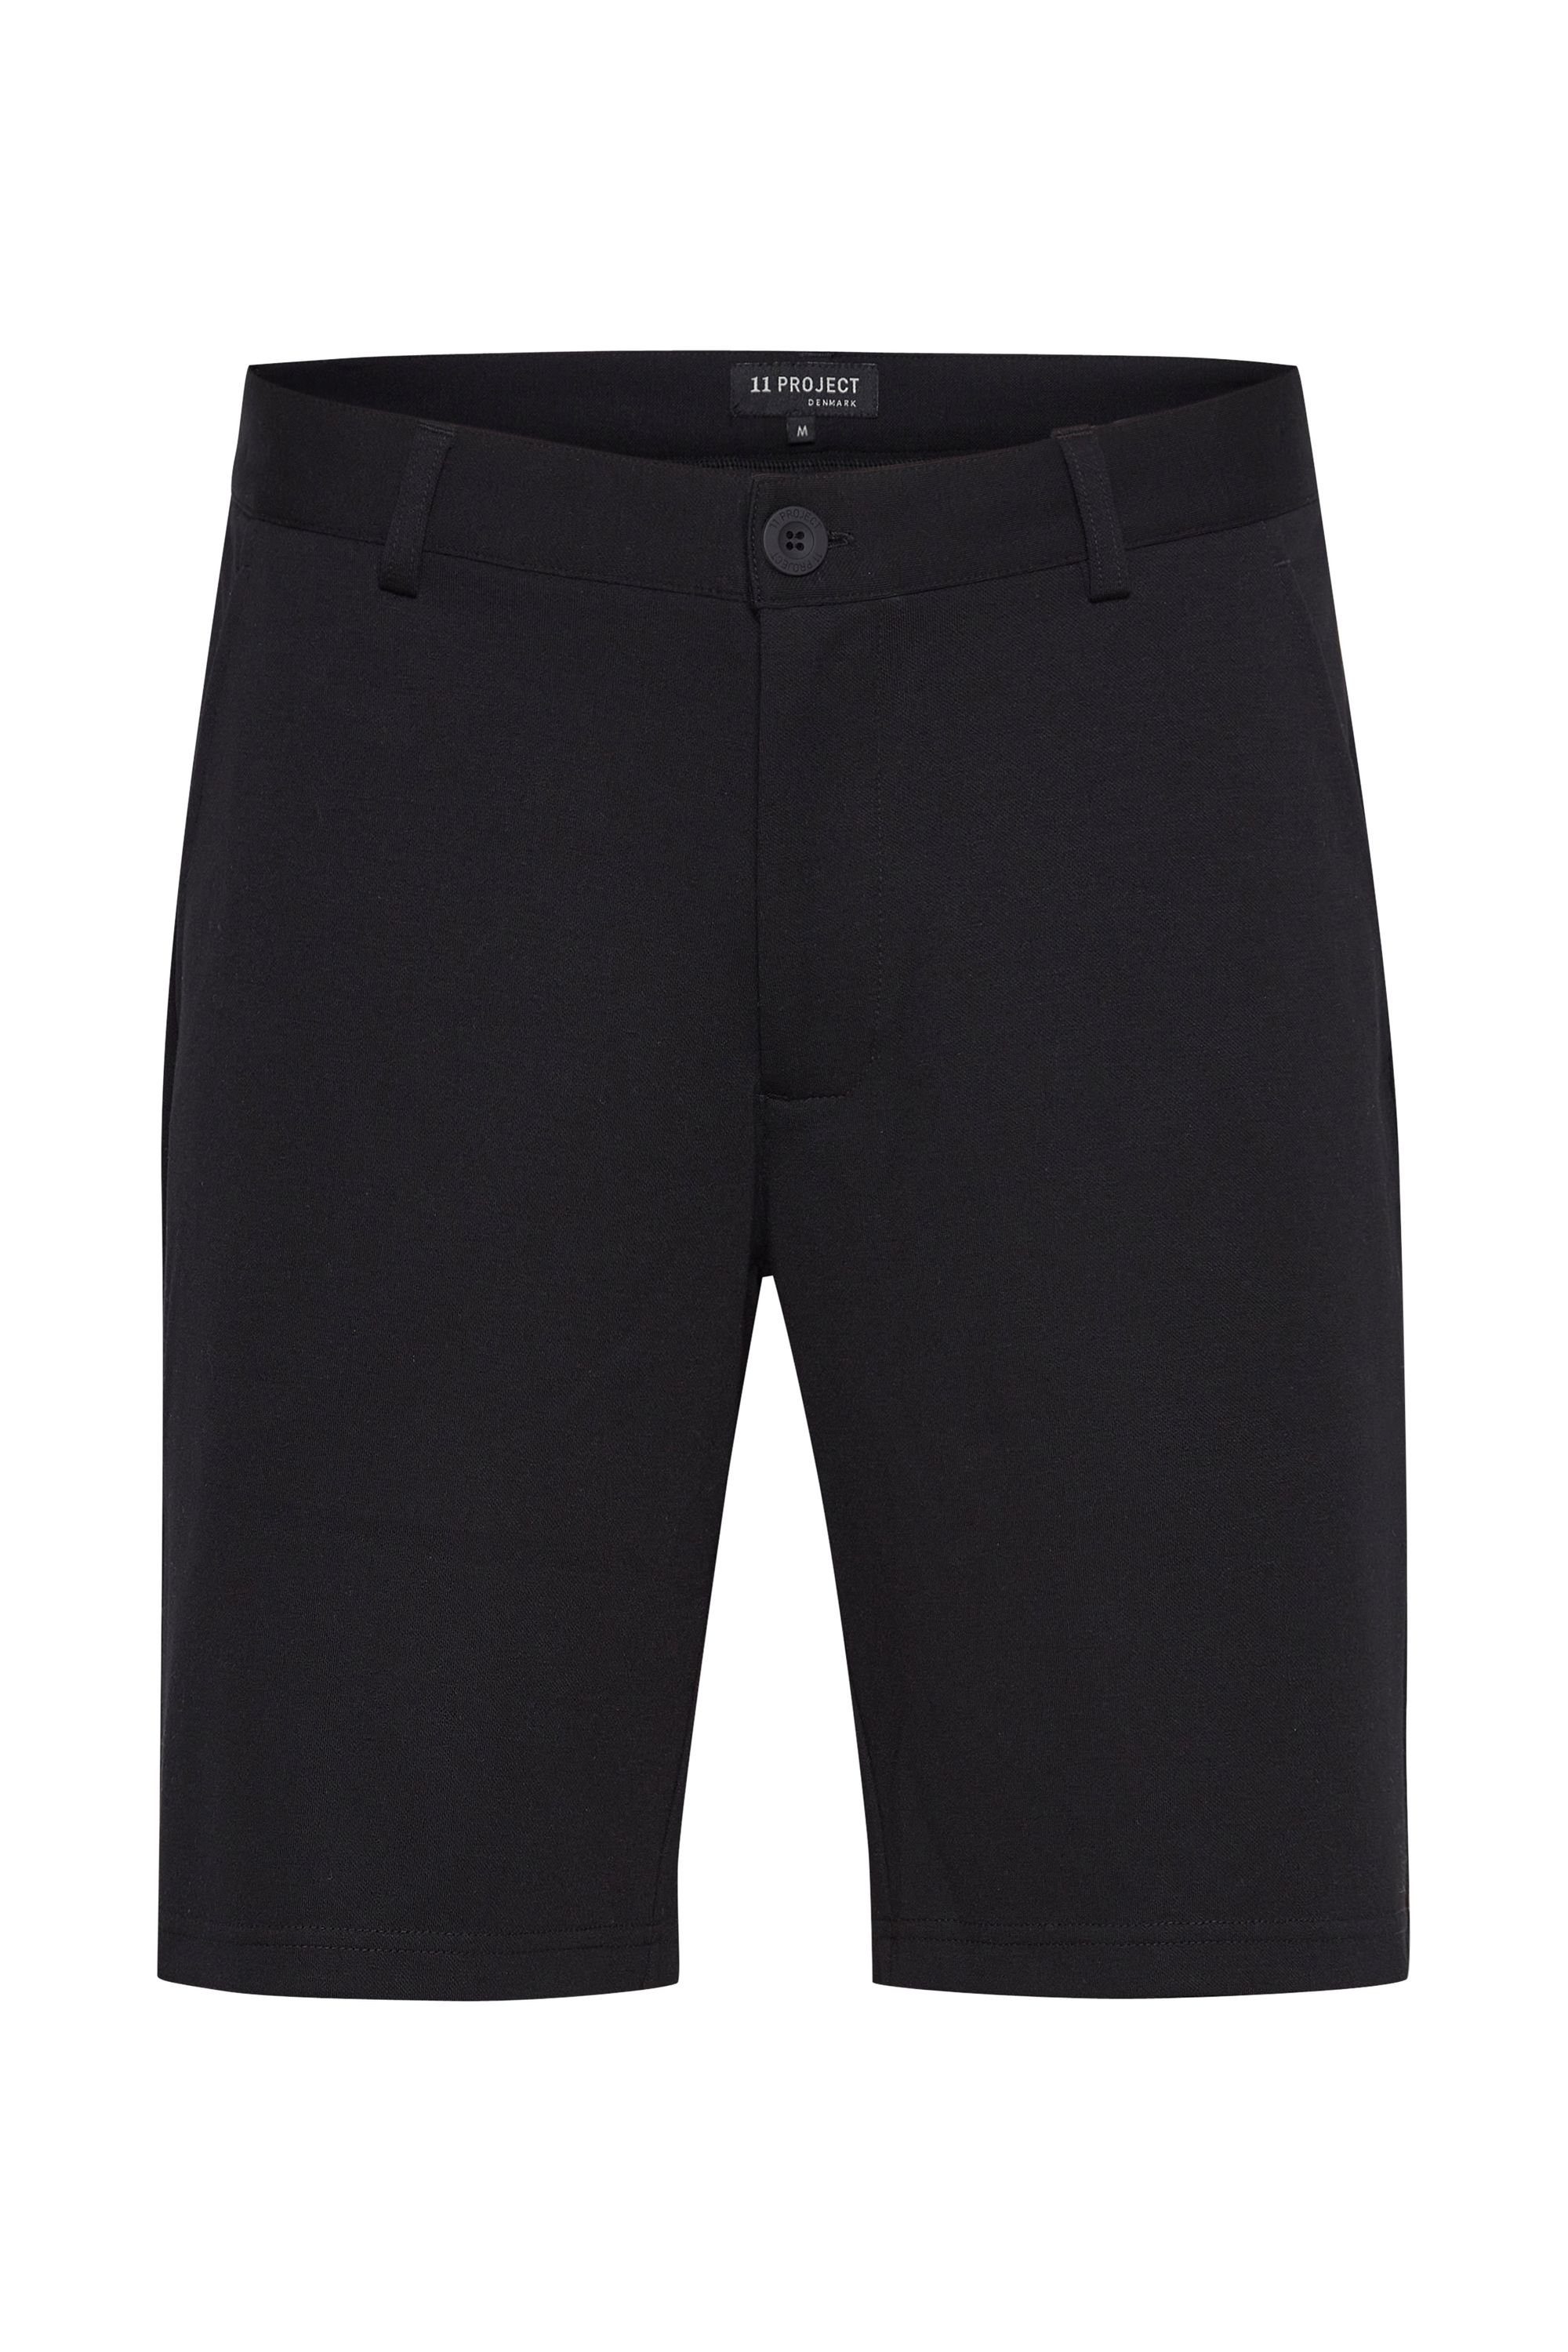 PRCamal Project Project 11 Black 11 Shorts